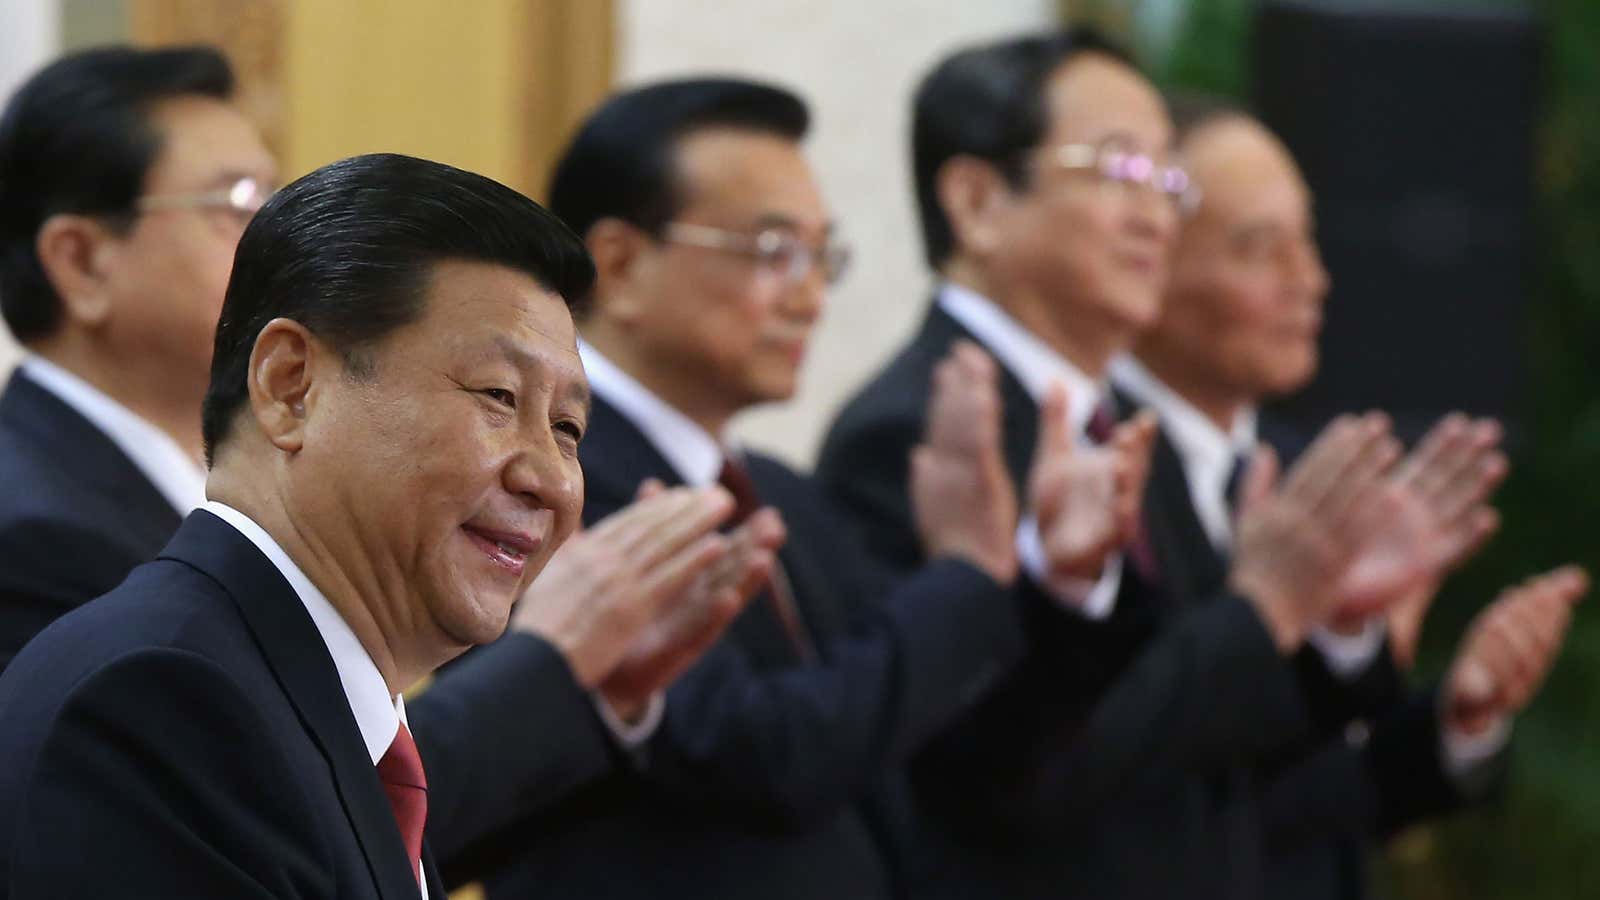 Chinese Vice President Xi Jinping in the forefront